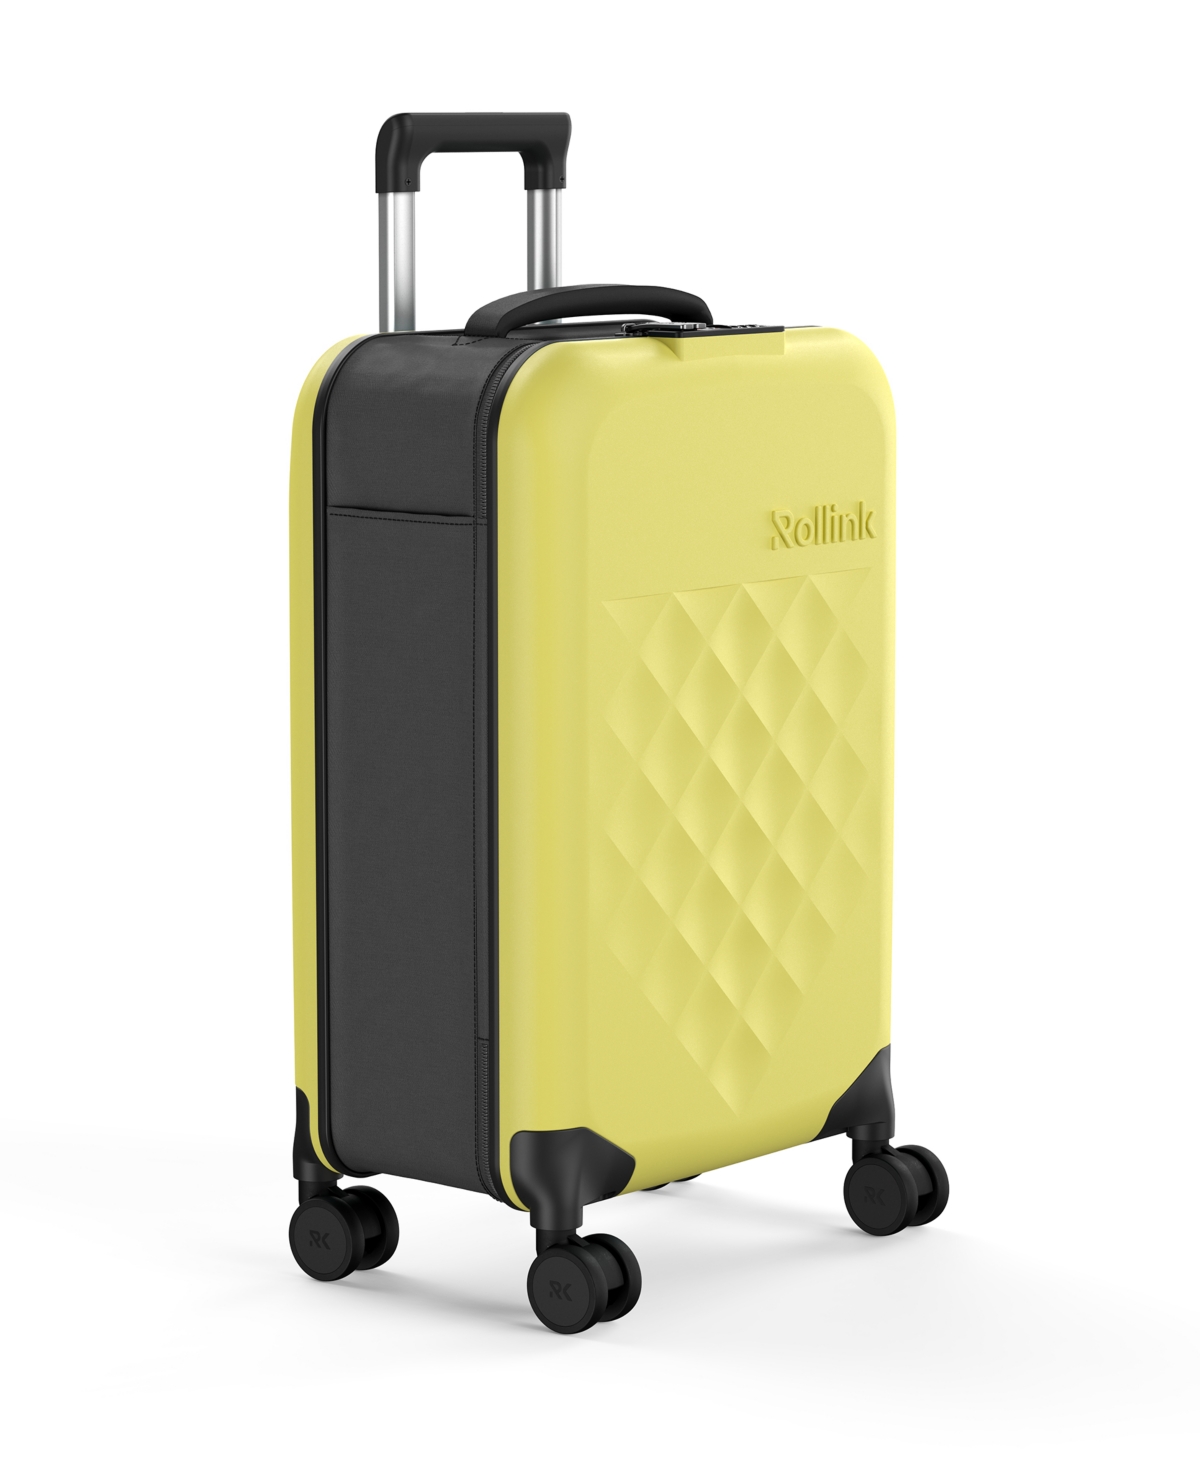 Rollink Flex 360 Carry-on 22" Spinner Suitcase In Bright Yellow